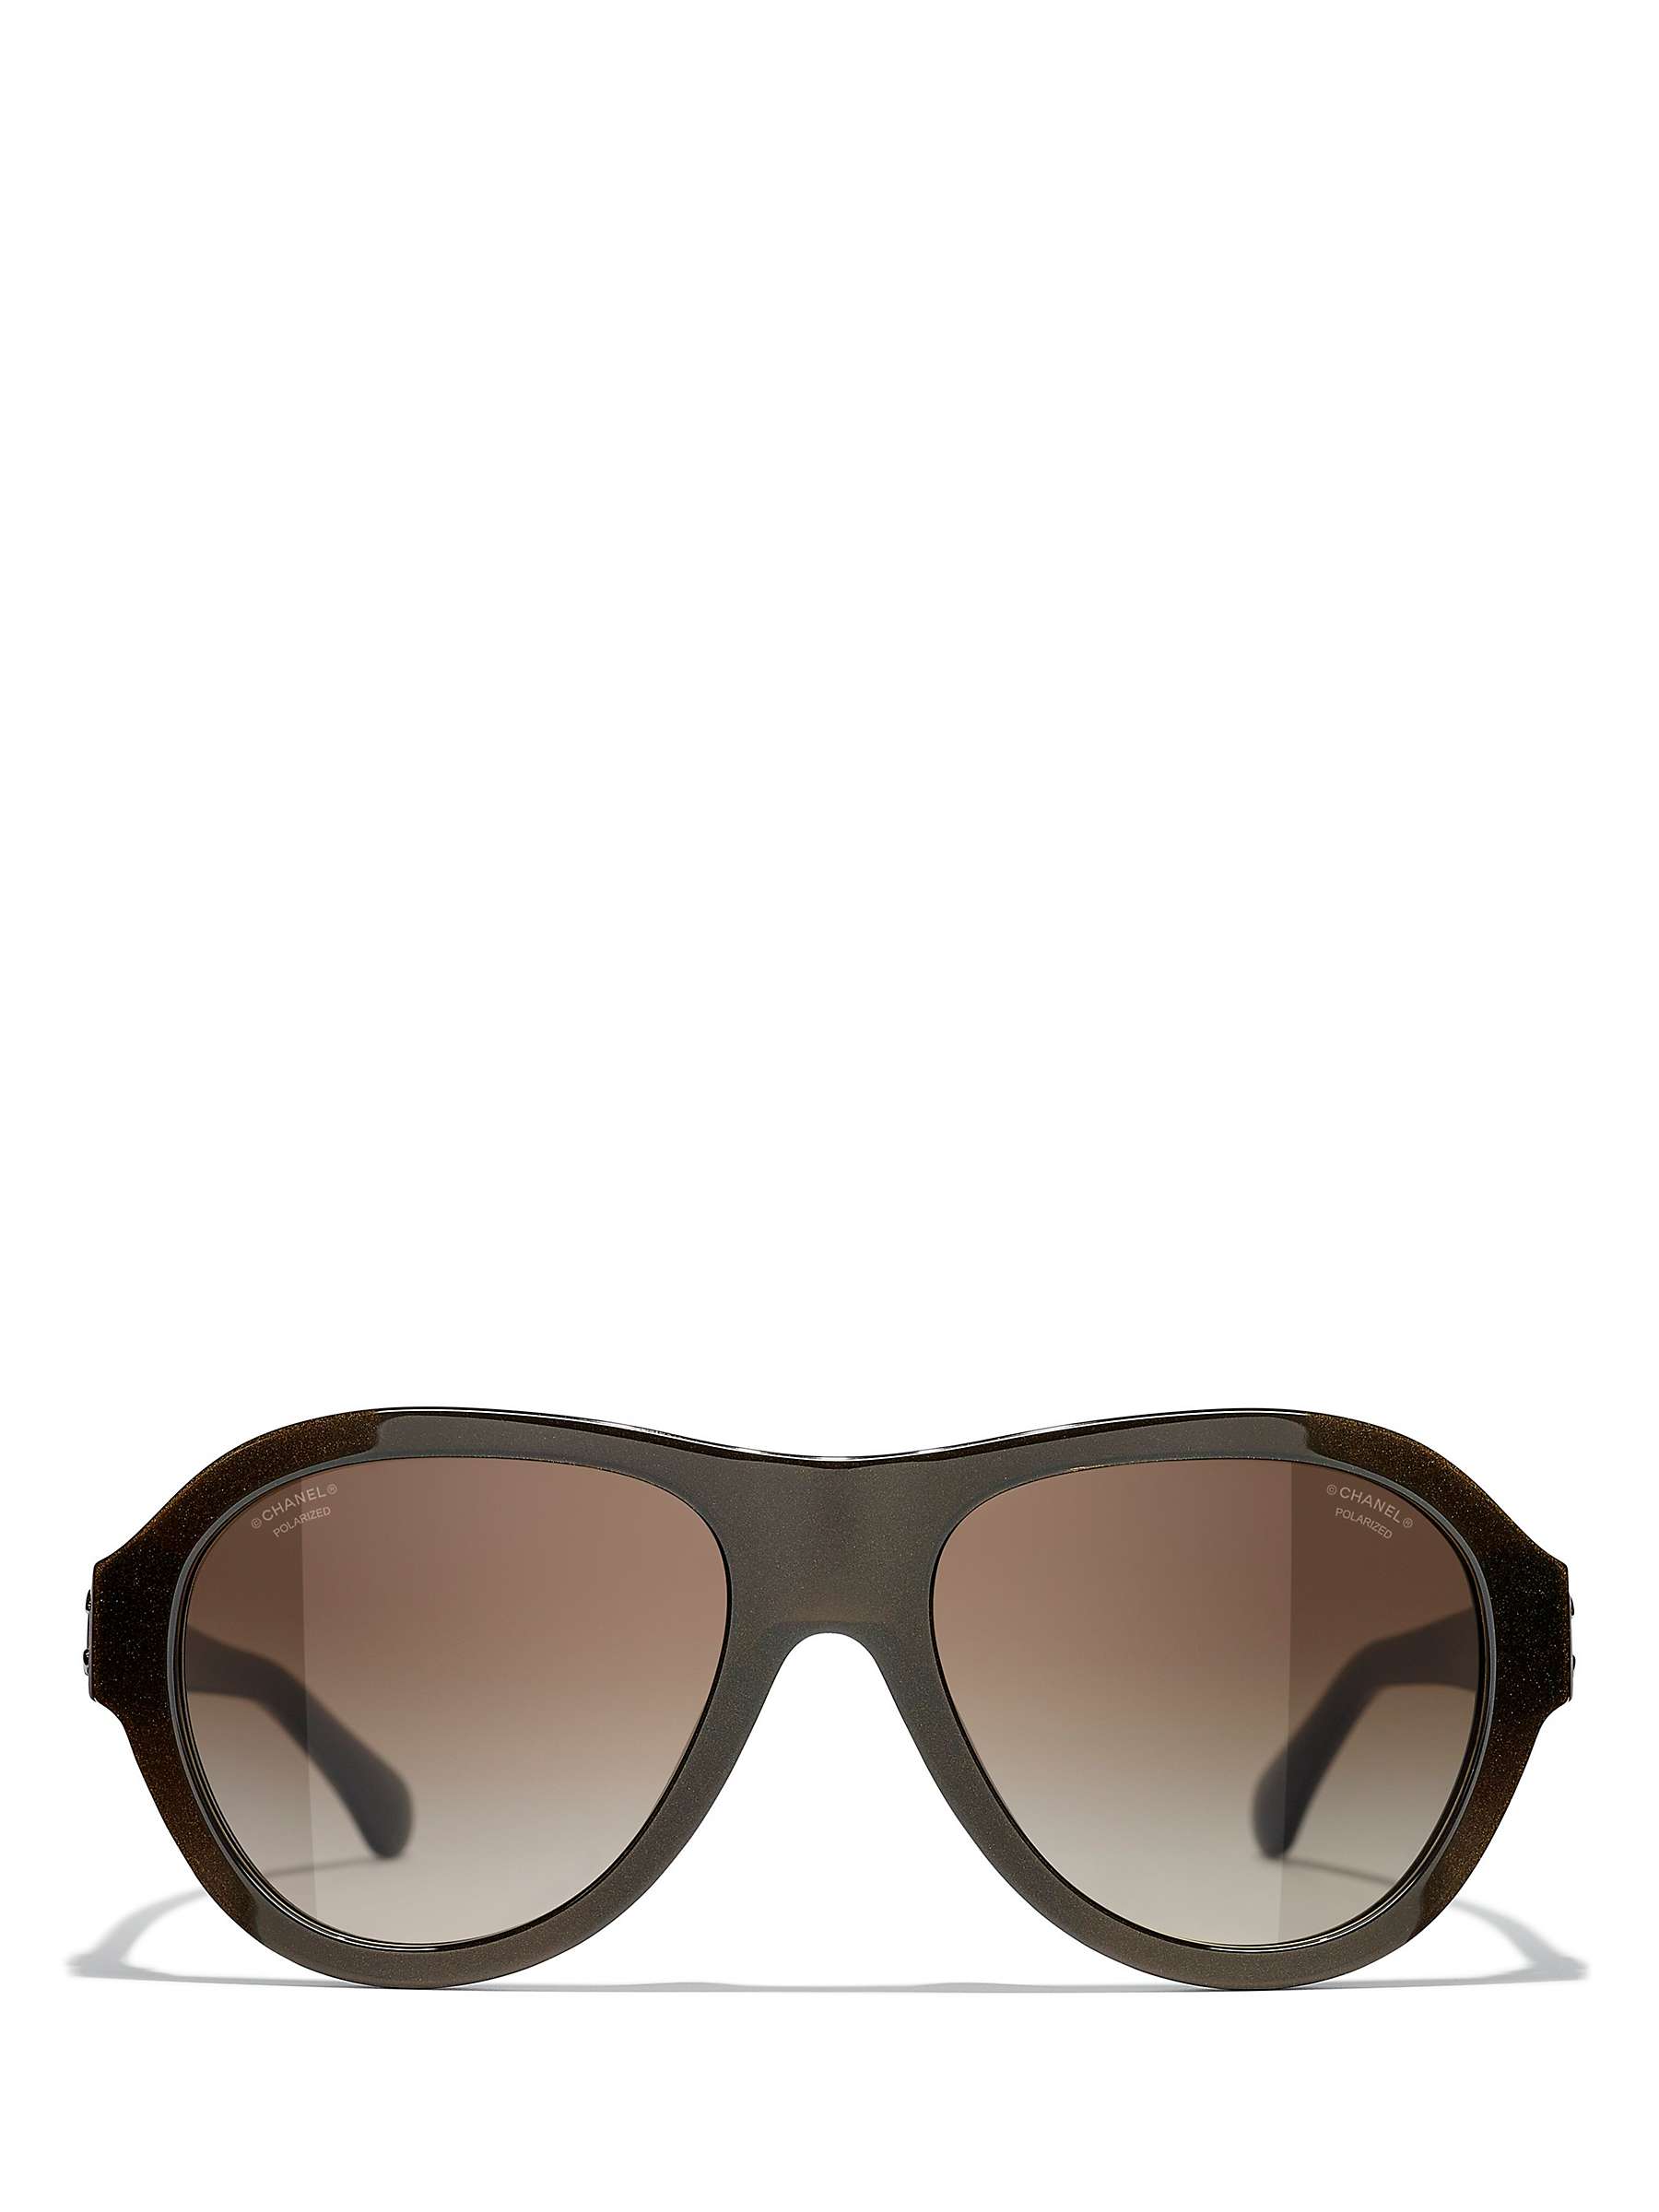 Buy CHANEL Oval Sunglasses CH5467B Iridescent Brown/Brown Gradient Online at johnlewis.com